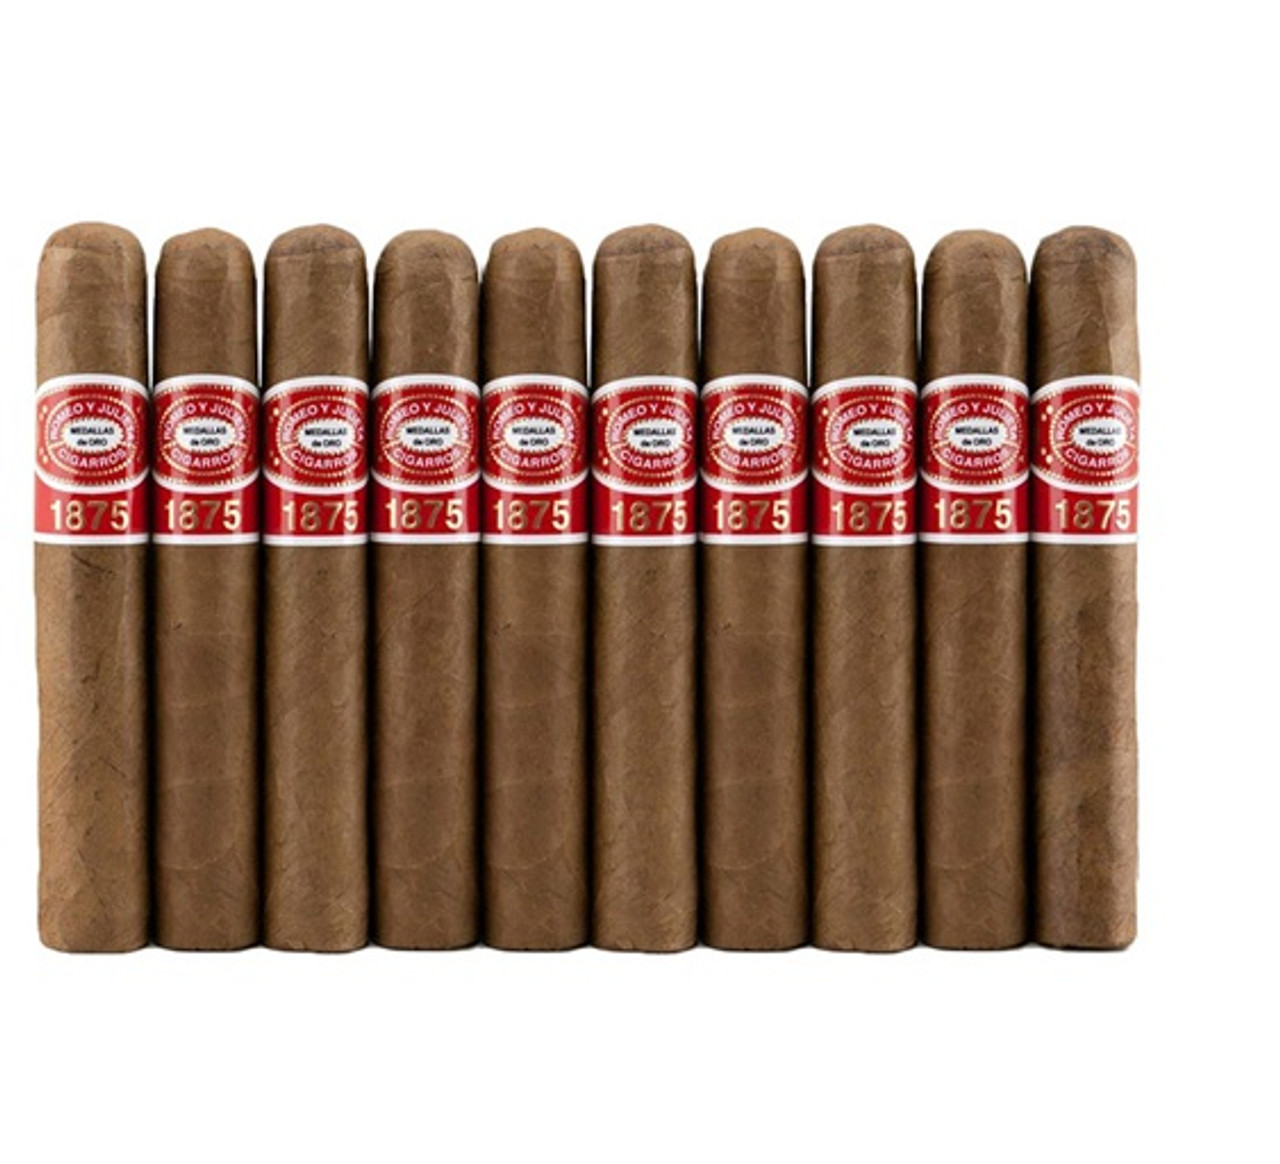 Top 8 Cigar Brands You Need to Try